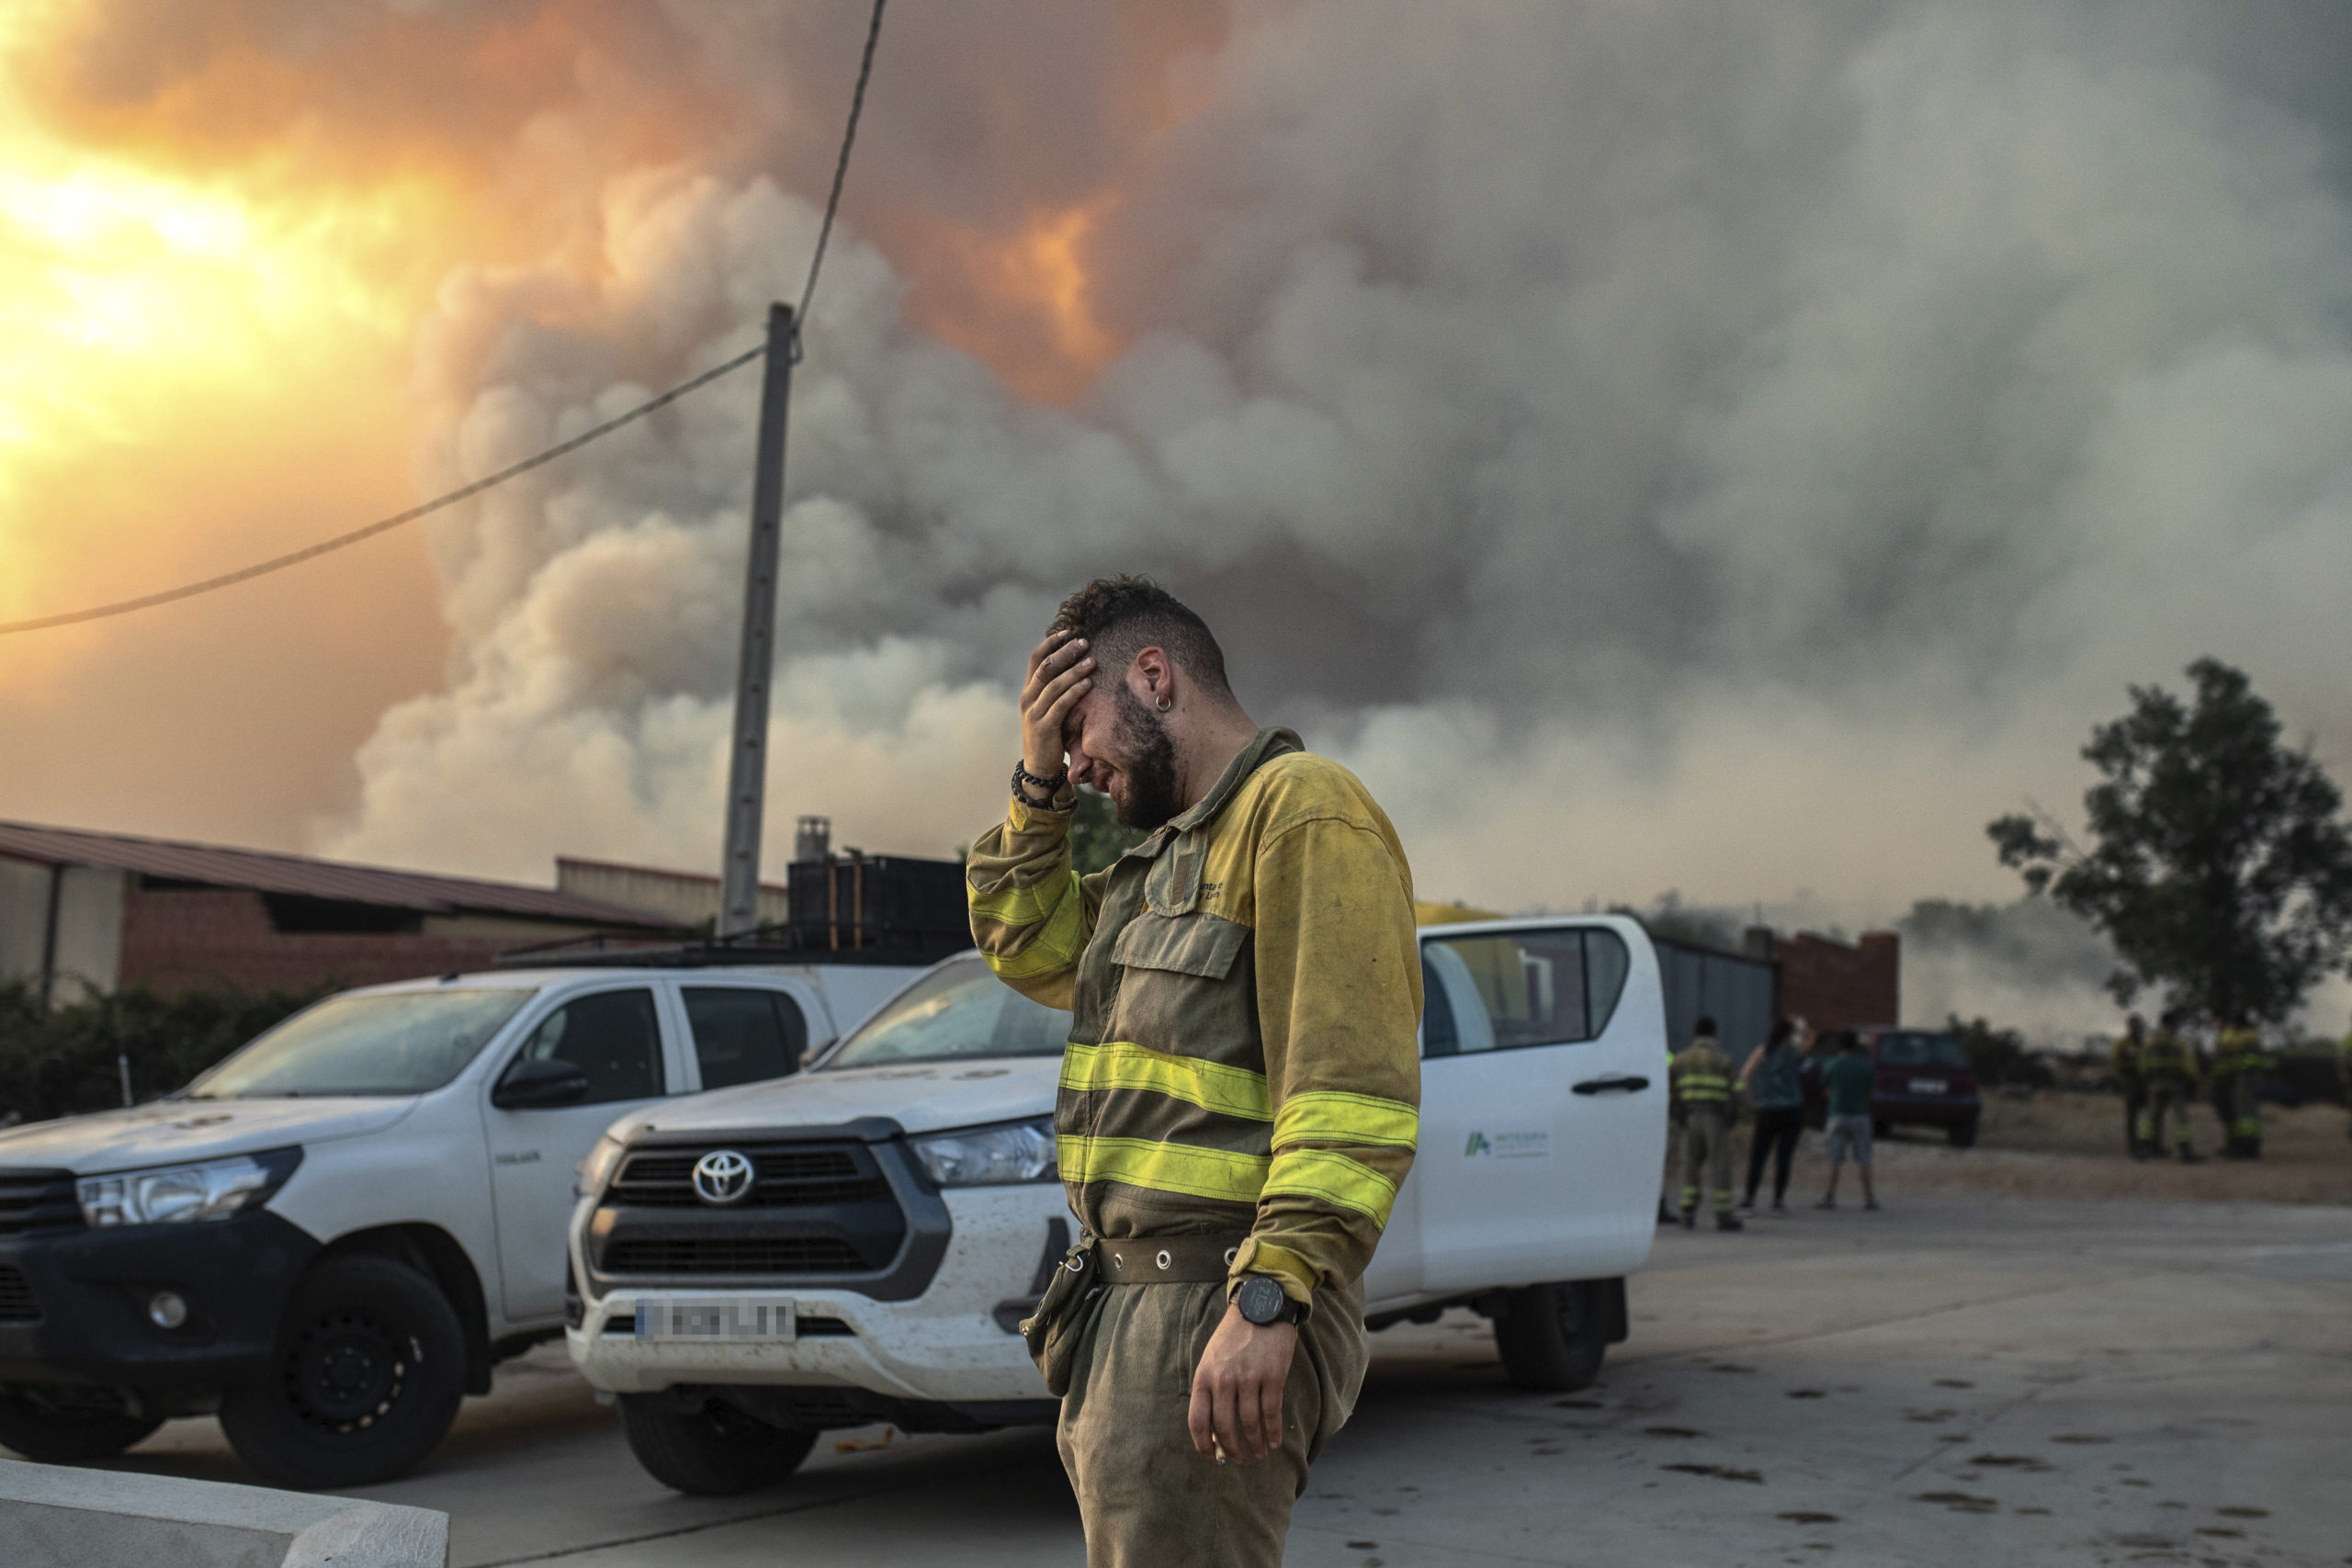 In the foreground is a large cloud of smoke, with a glimpse of flame behind it. At the center, a firefighter stands with his head in his hand.